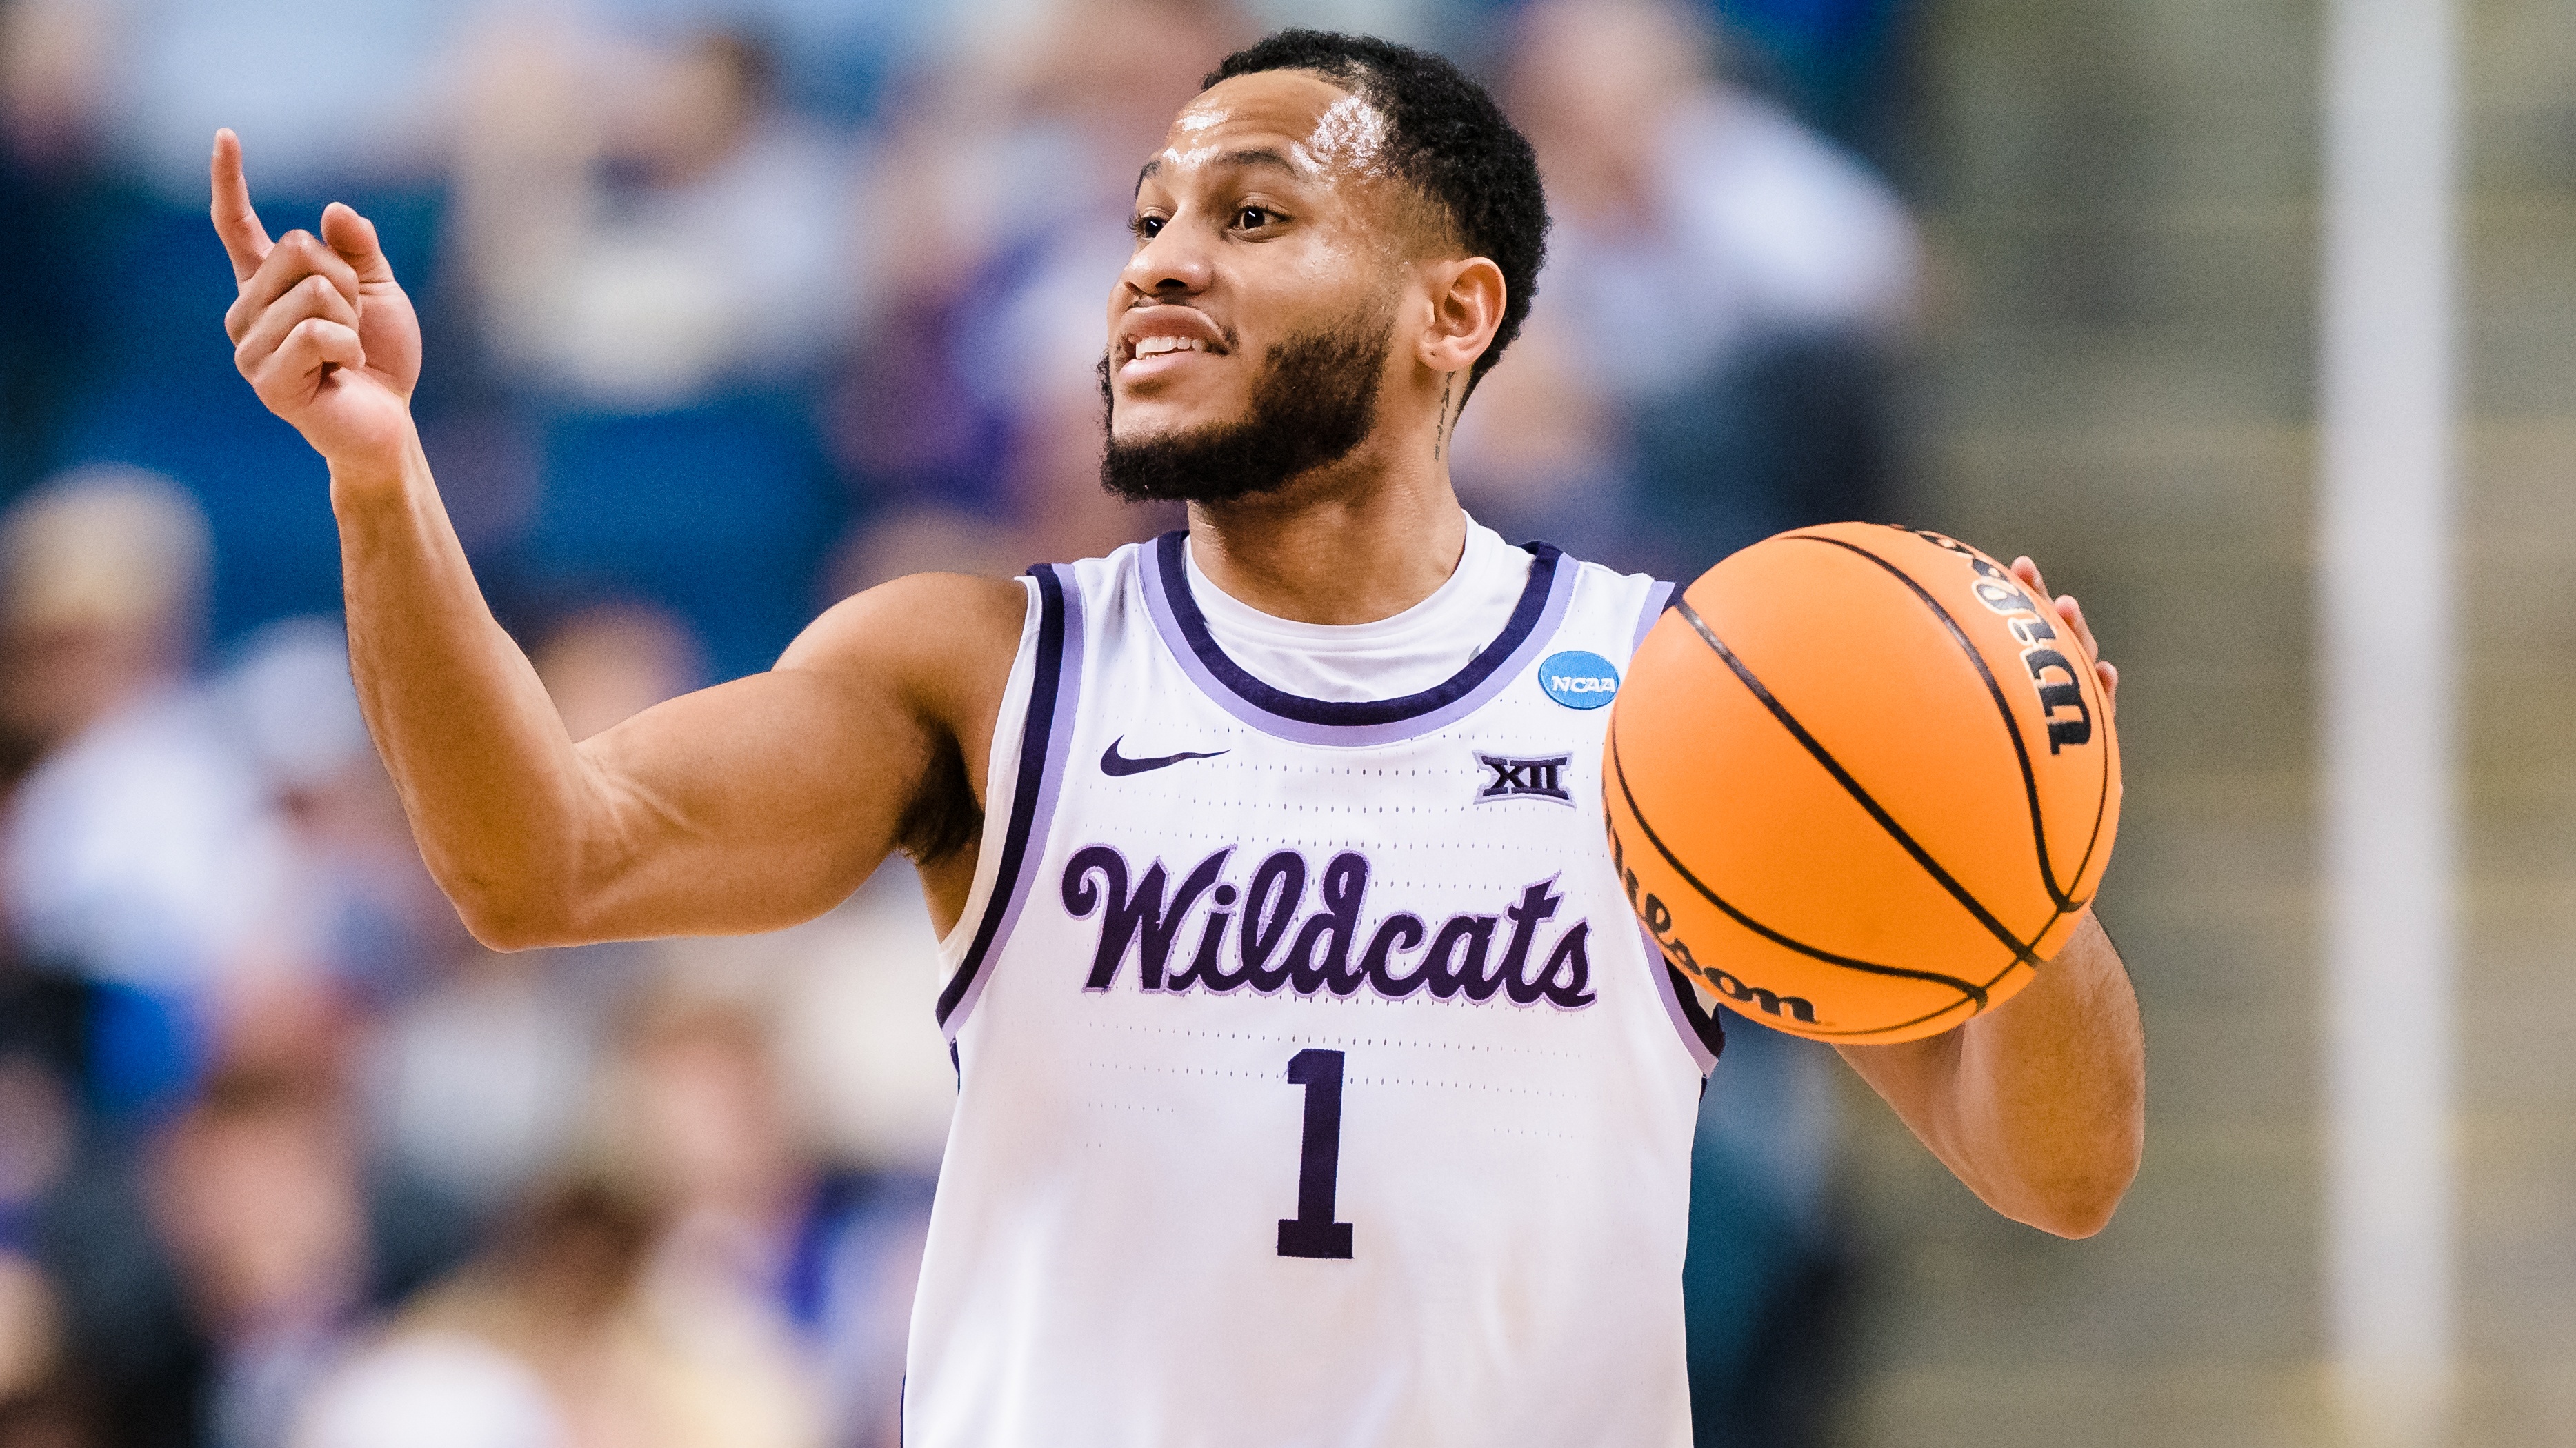 Kansas State vs Michigan State live stream how to watch March Madness 2023 online from anywhere TechRadar